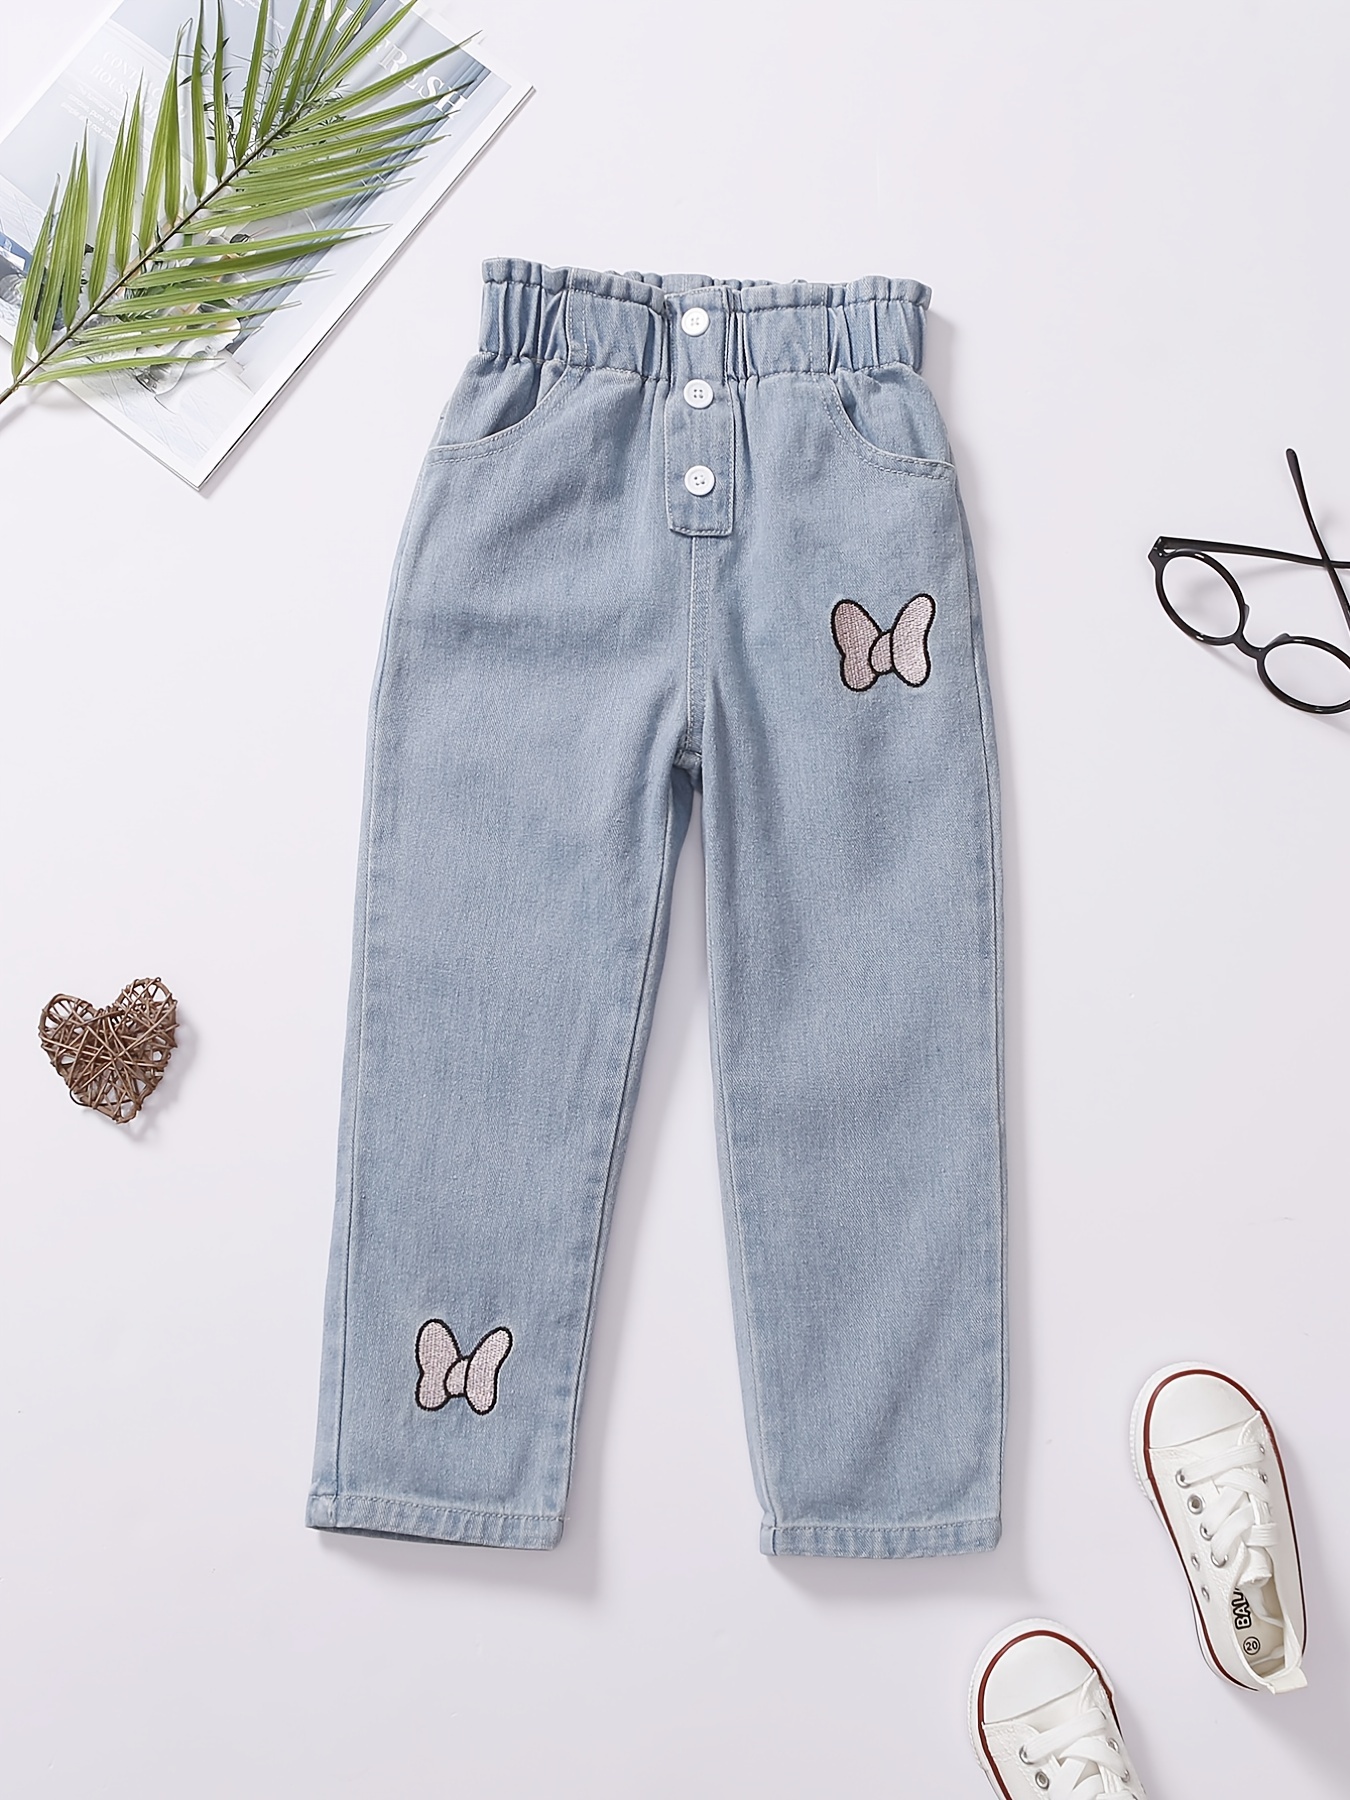 Children Clothing Pants for Girls Jeans Teenagers Cute Bow